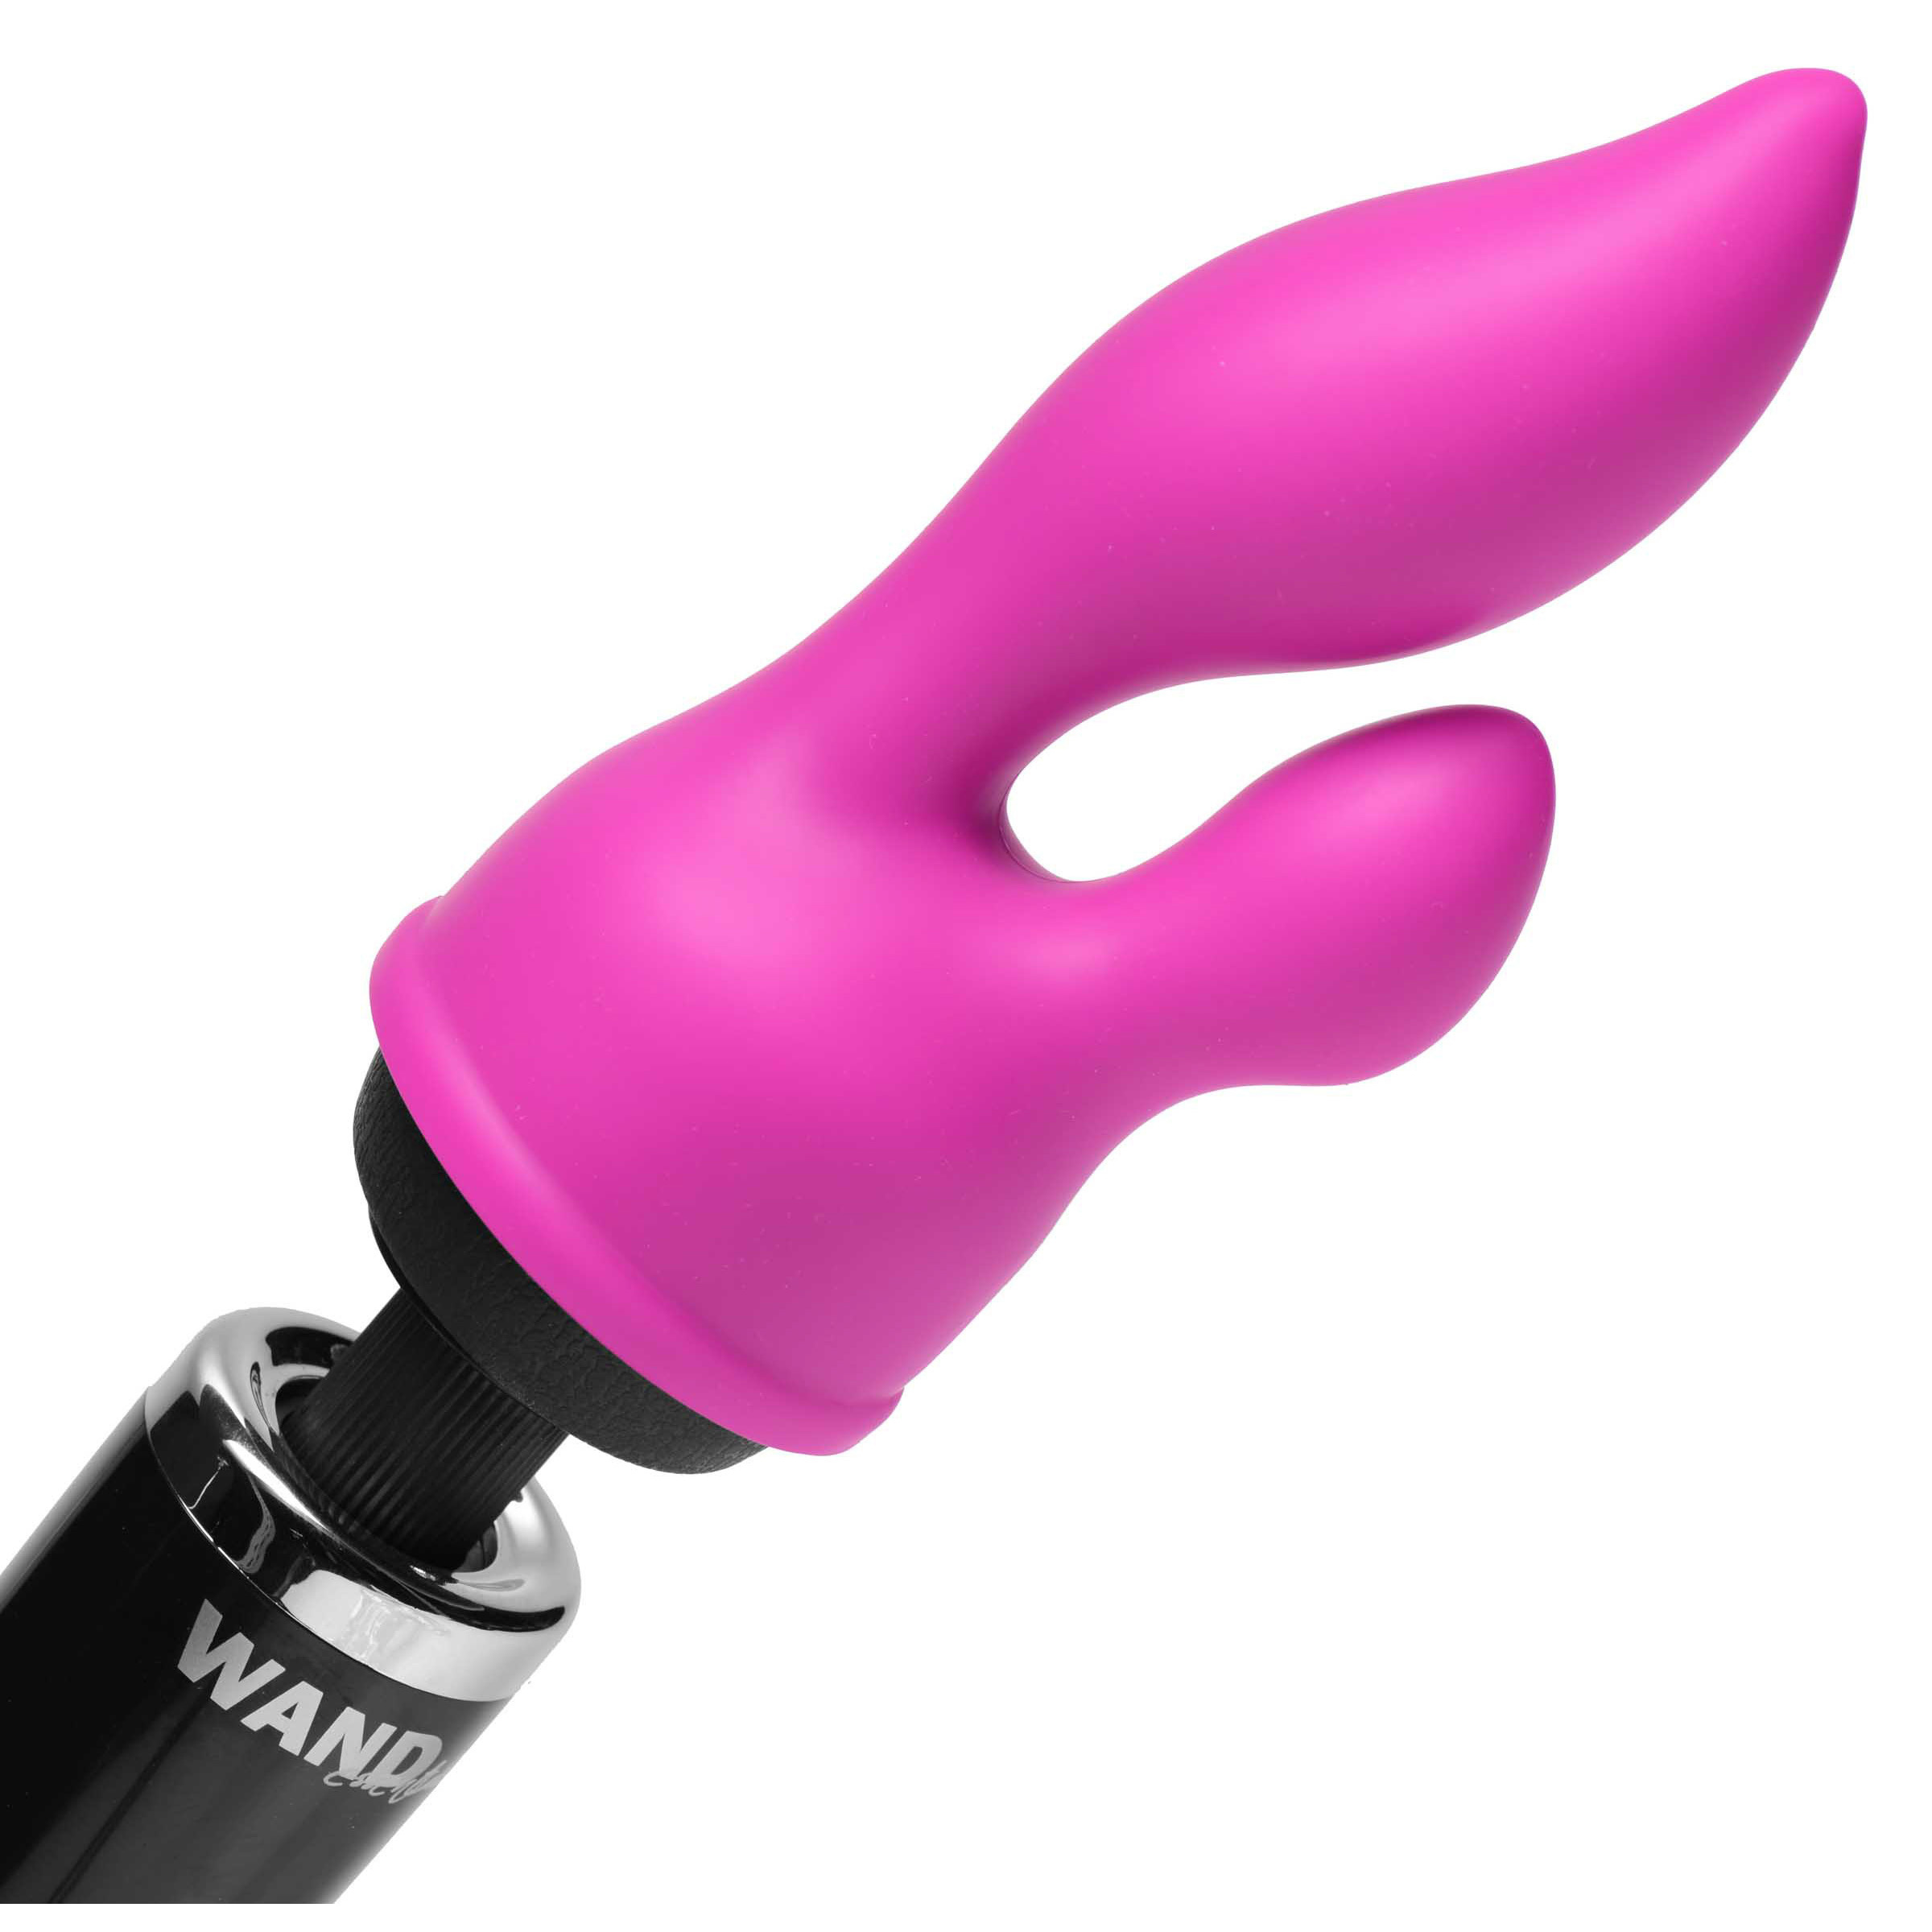 Euphoria+G-Spot+and+Clit+Stimulating+Silicone+Wand+Massager+Attachment